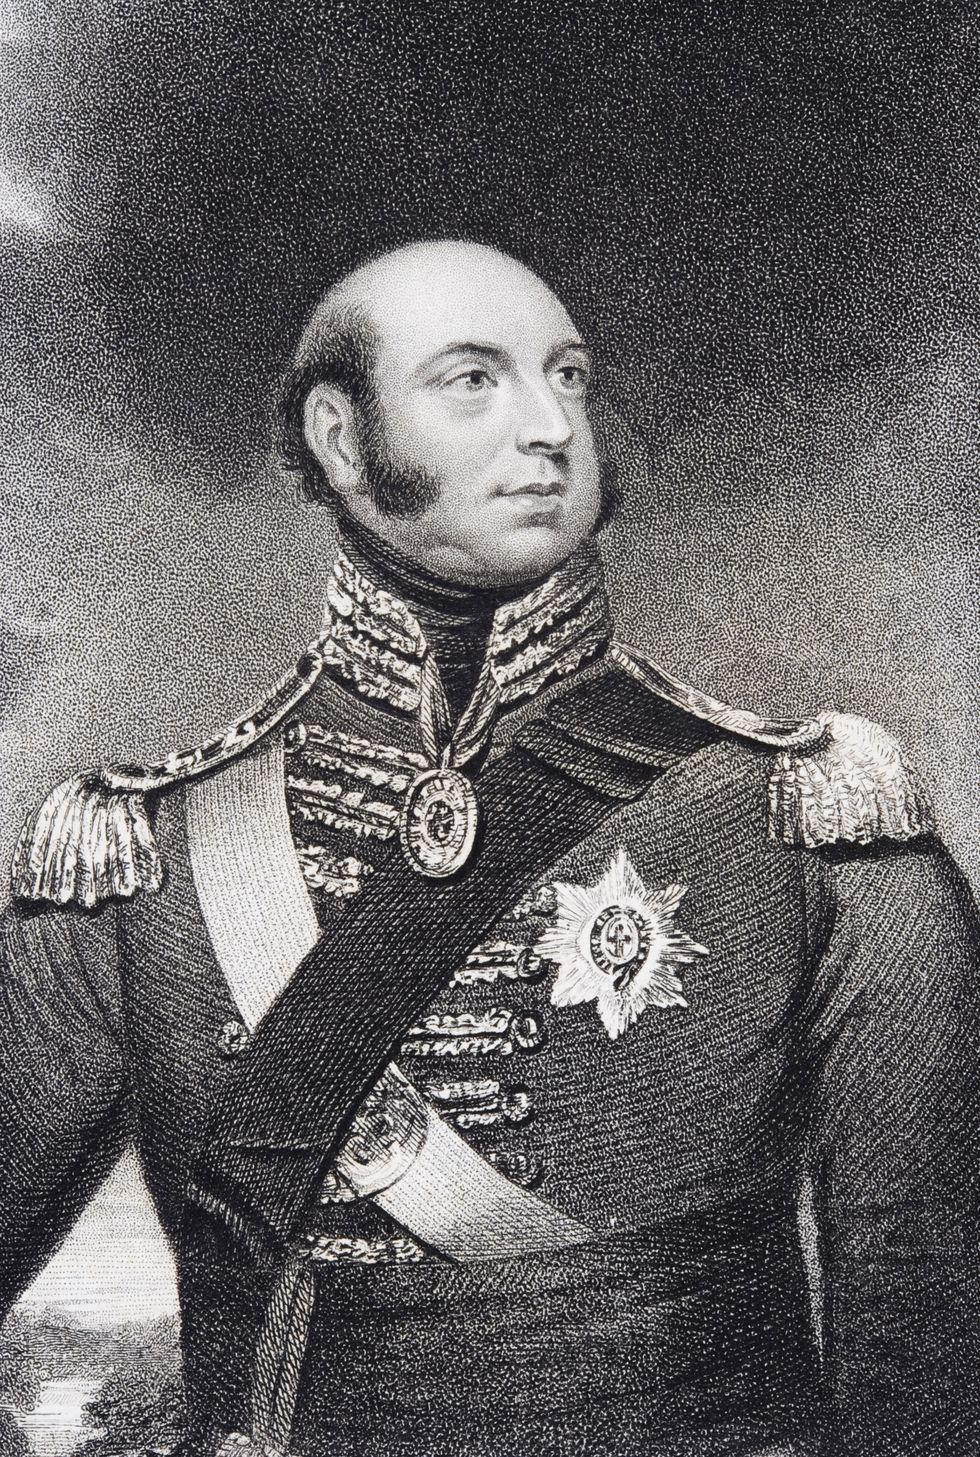 prince edward augustus duke of kent and strathearn 1767 to 1820 4th son of king george iii and father of queen victoria